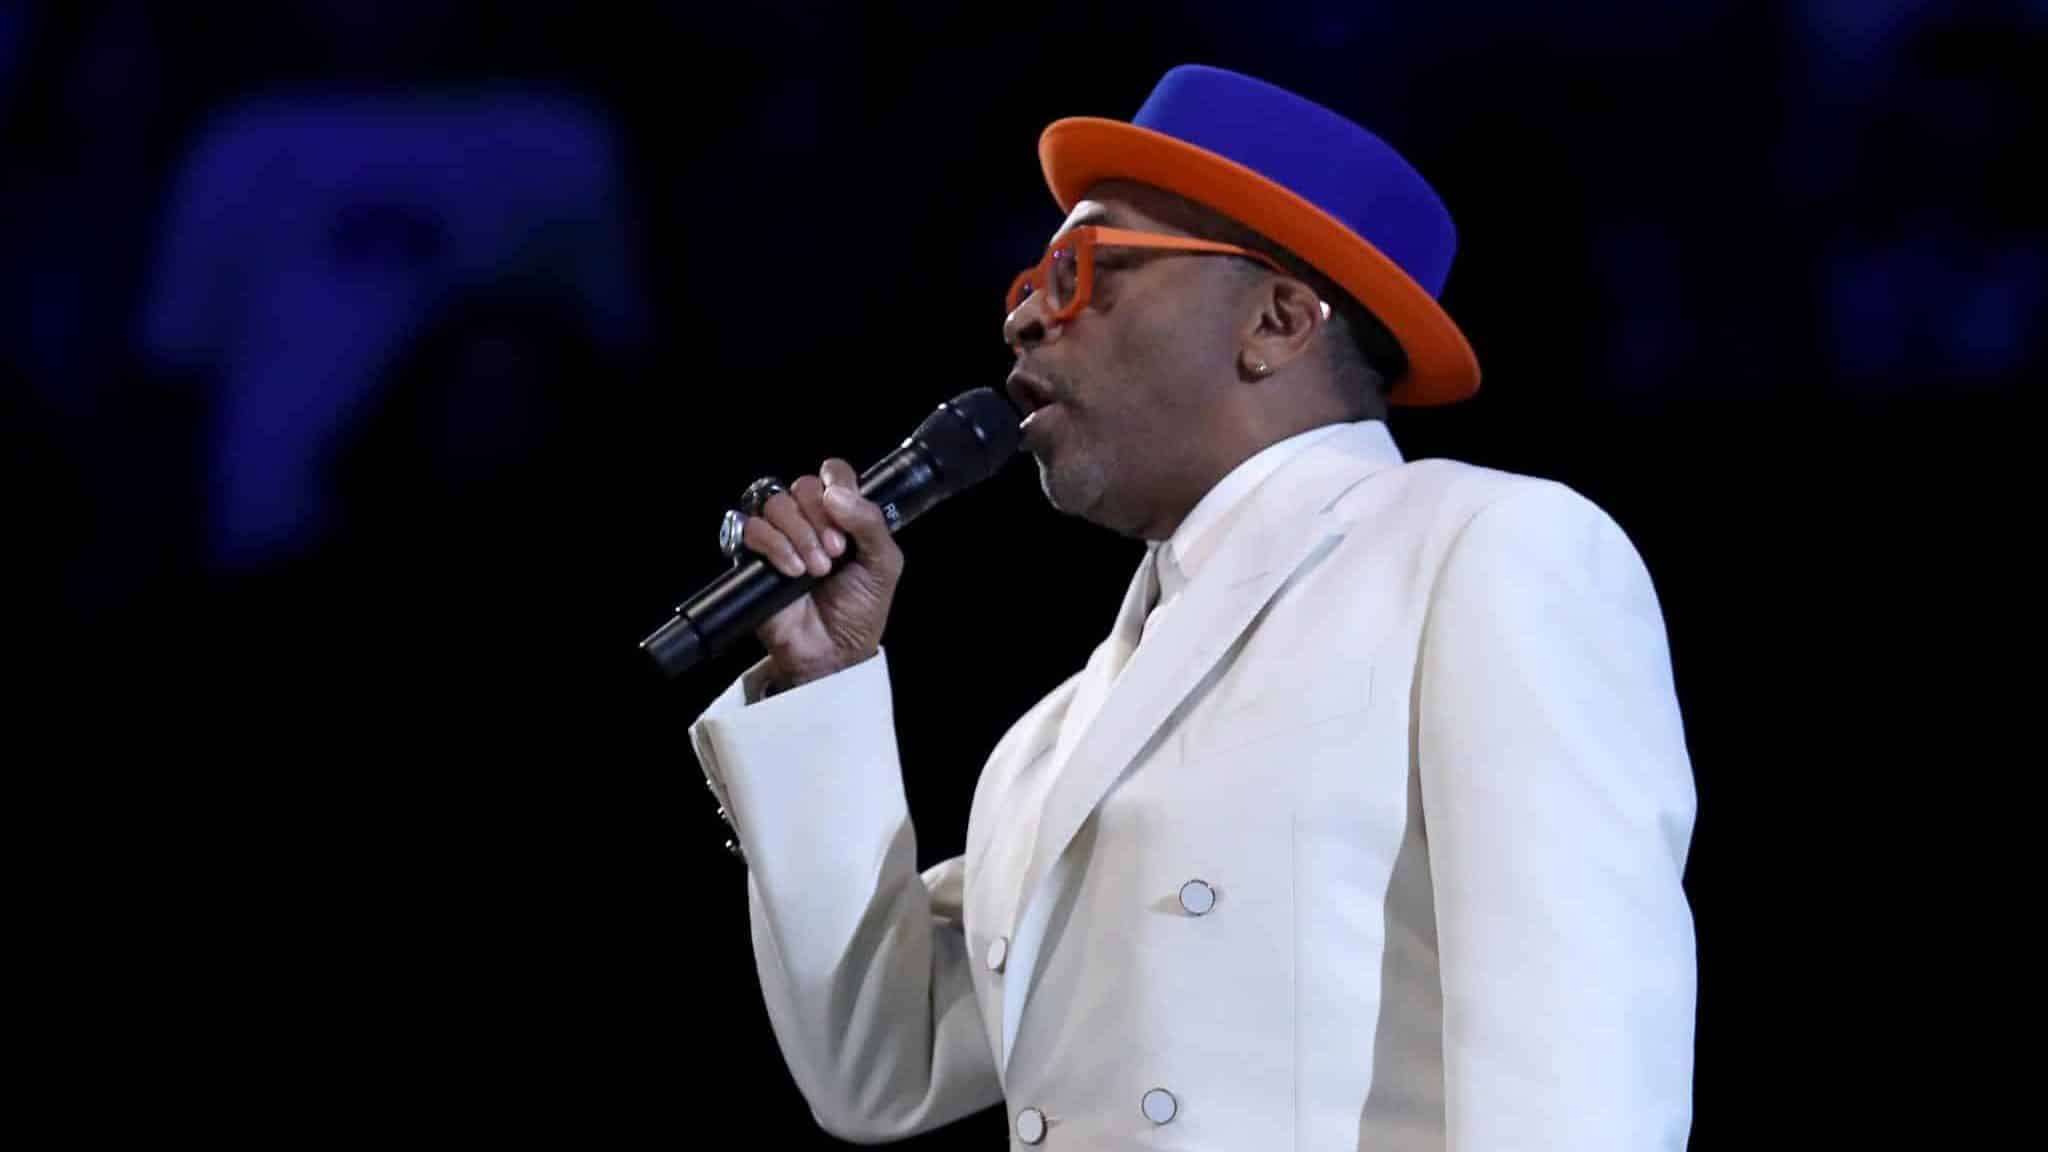 CHARLOTTE, NORTH CAROLINA - FEBRUARY 17: Filmmaker Spike Lee speaks at halftime during the NBA All-Star game as part of the 2019 NBA All-Star Weekend at Spectrum Center on February 17, 2019 in Charlotte, North Carolina. NOTE TO USER: User expressly acknowledges and agrees that, by downloading and/or using this photograph, user is consenting to the terms and conditions of the Getty Images License Agreement.